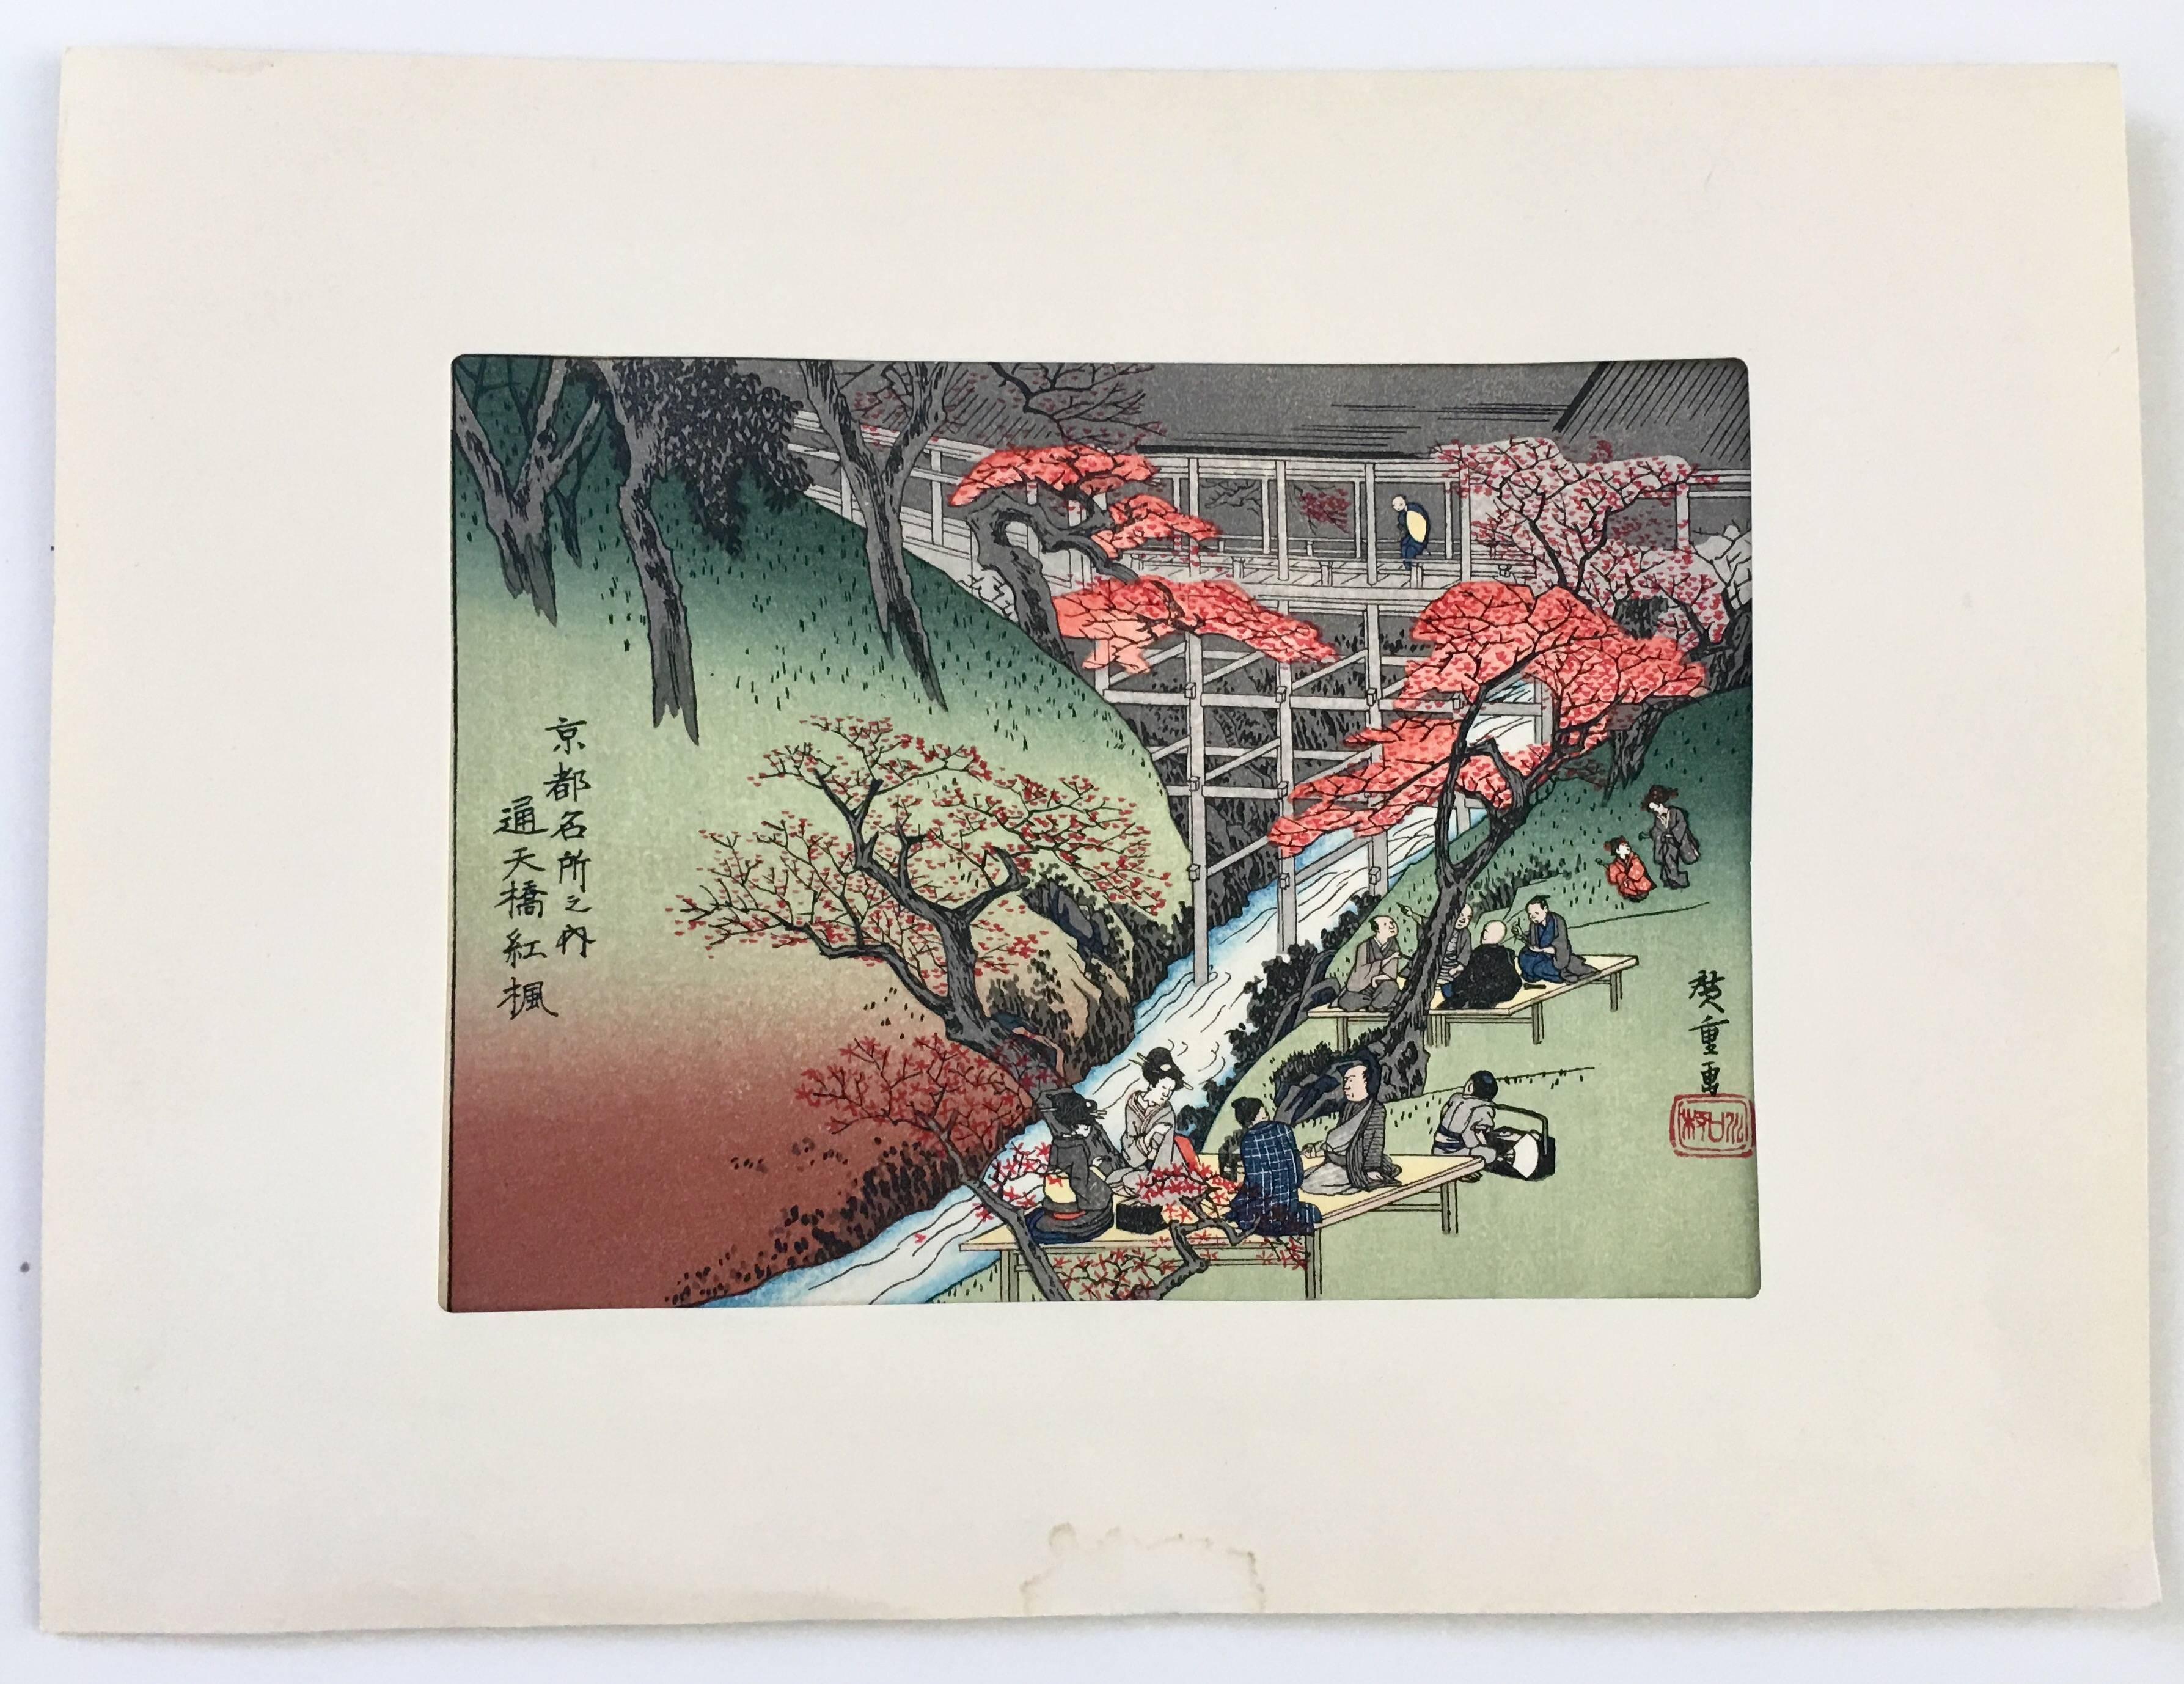 "Maple trees at the "Bridge to Heaven." From the series of "Famous Places of Kyoto" by, Hiroshige Ando (1797-1858). Includes matte, unframed. Image measures, 7.5" x 10.5" inches. This vintage print was distributed